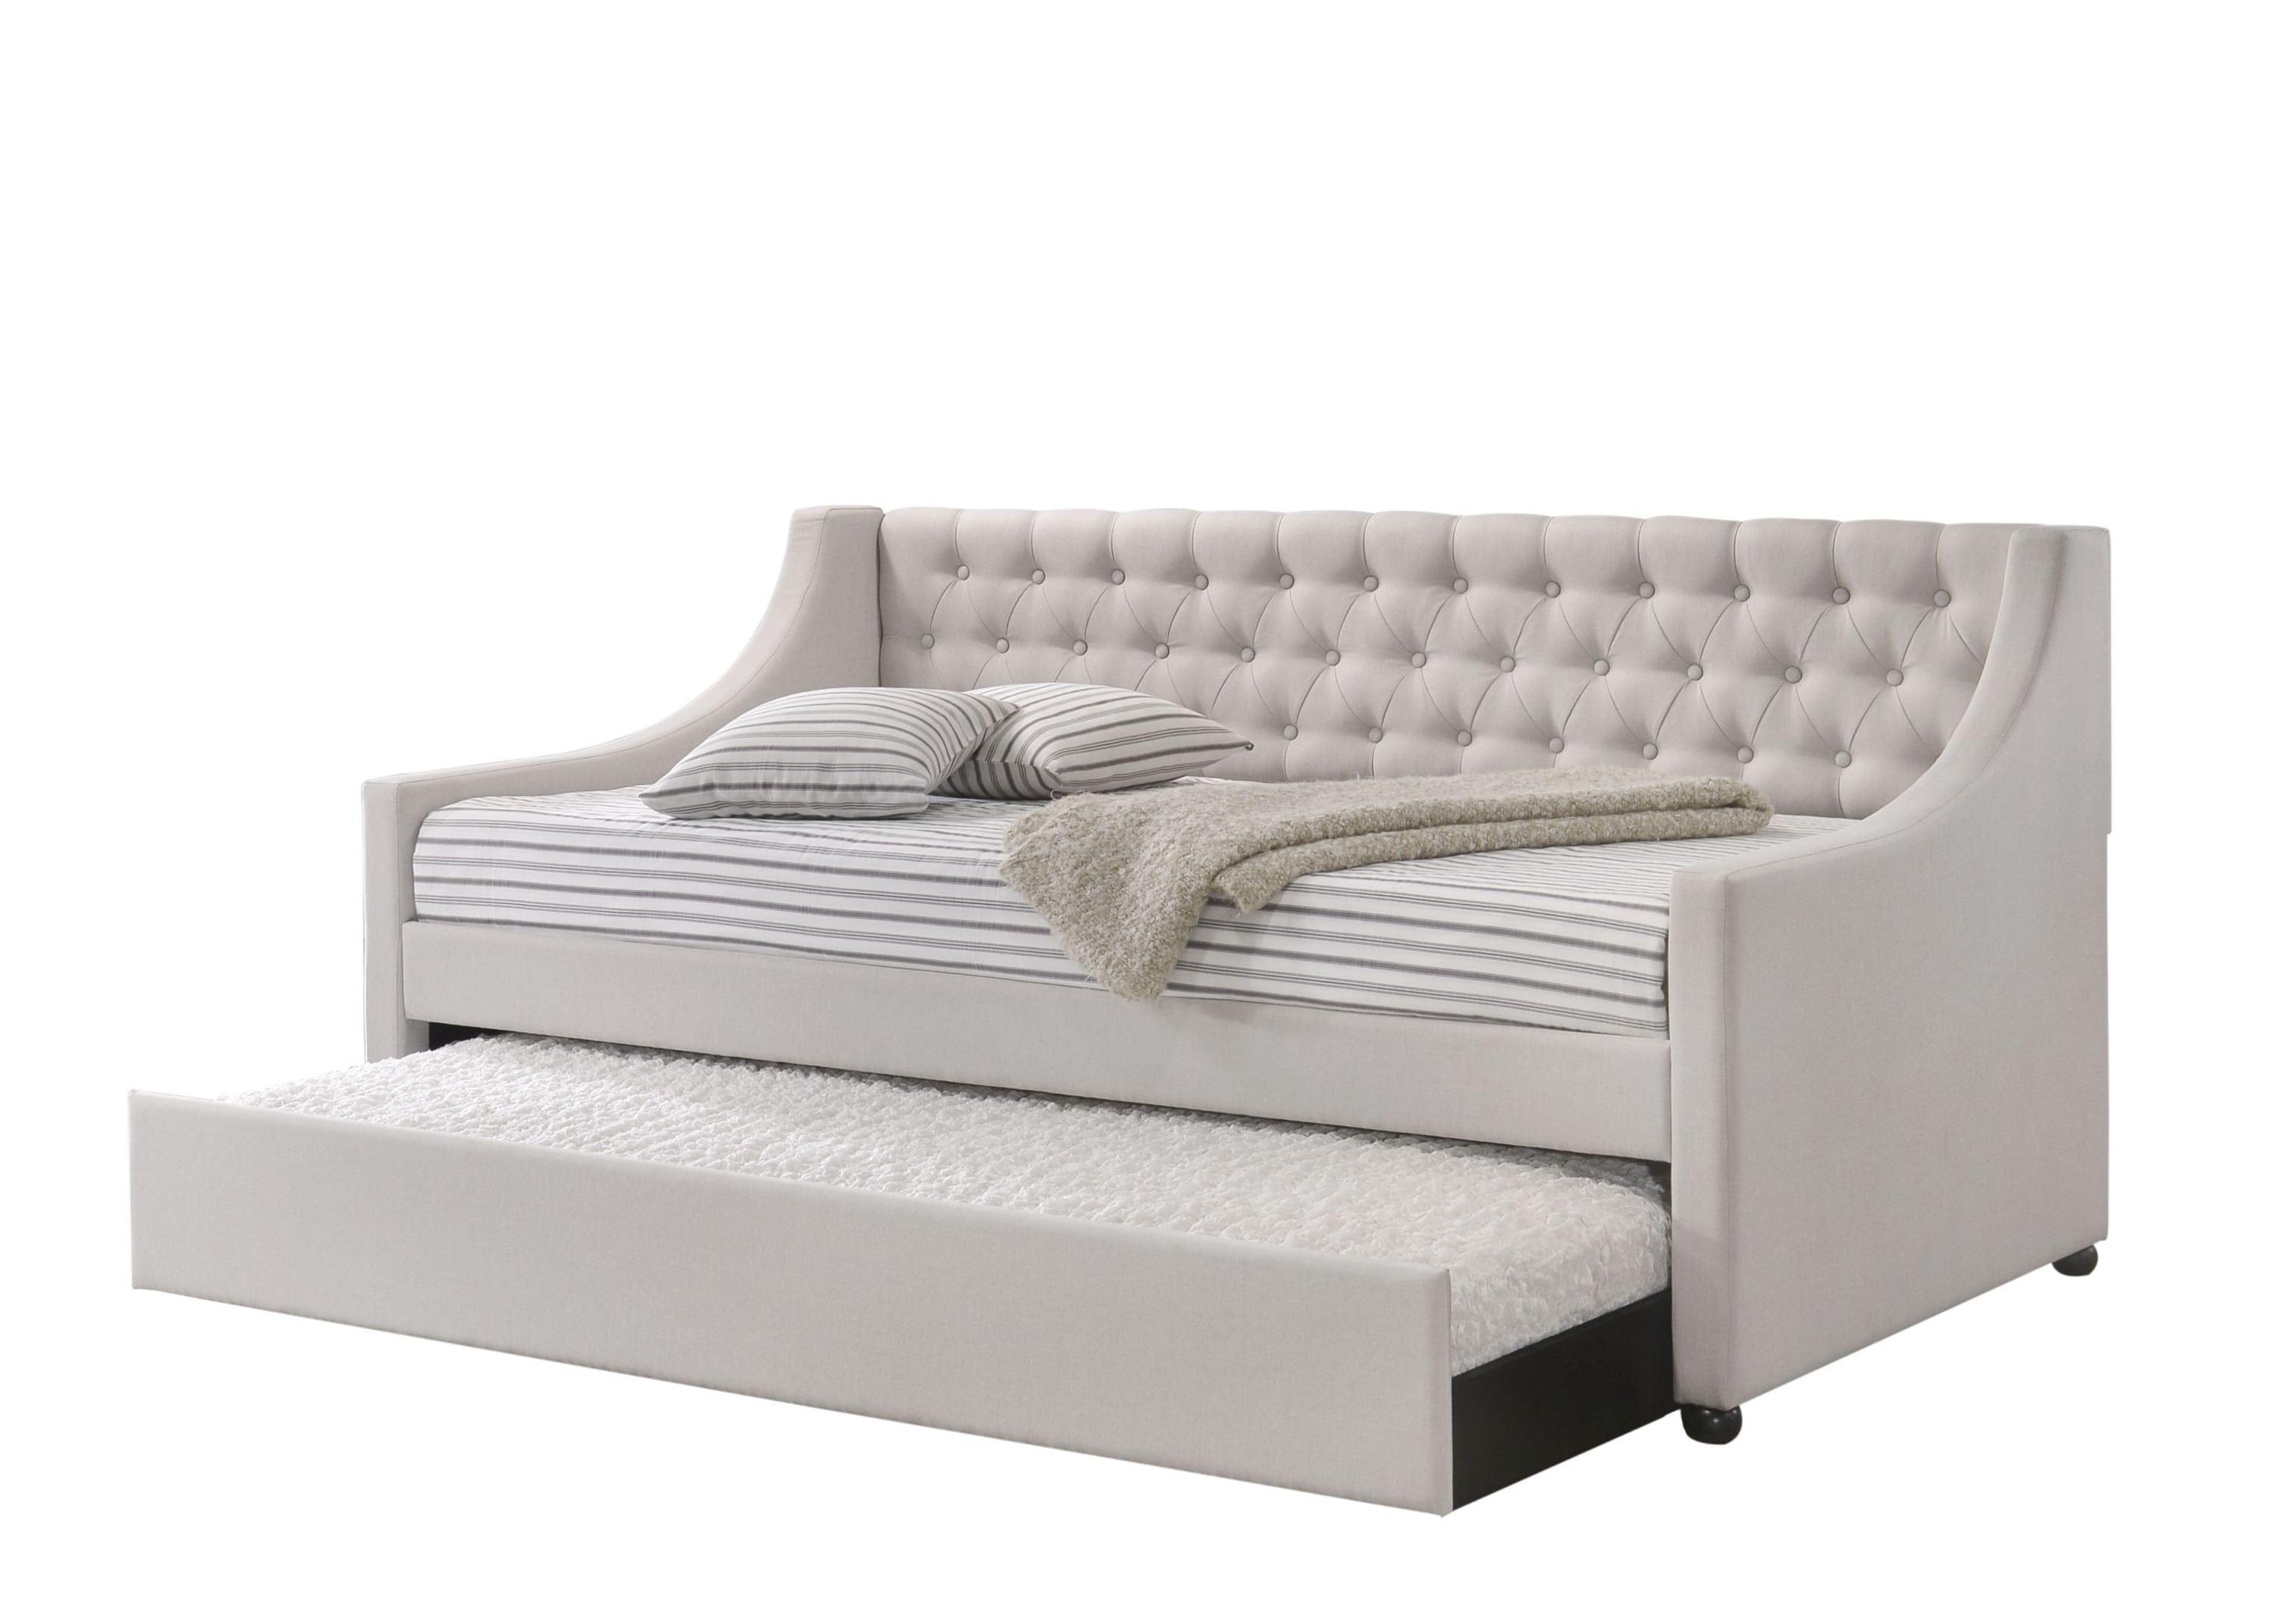 Shop ACME Lianna Daybed & Trundle (Twin Size), Fog Fabric (1Set/2Ctn) 39395 Mademoiselle Home Decor